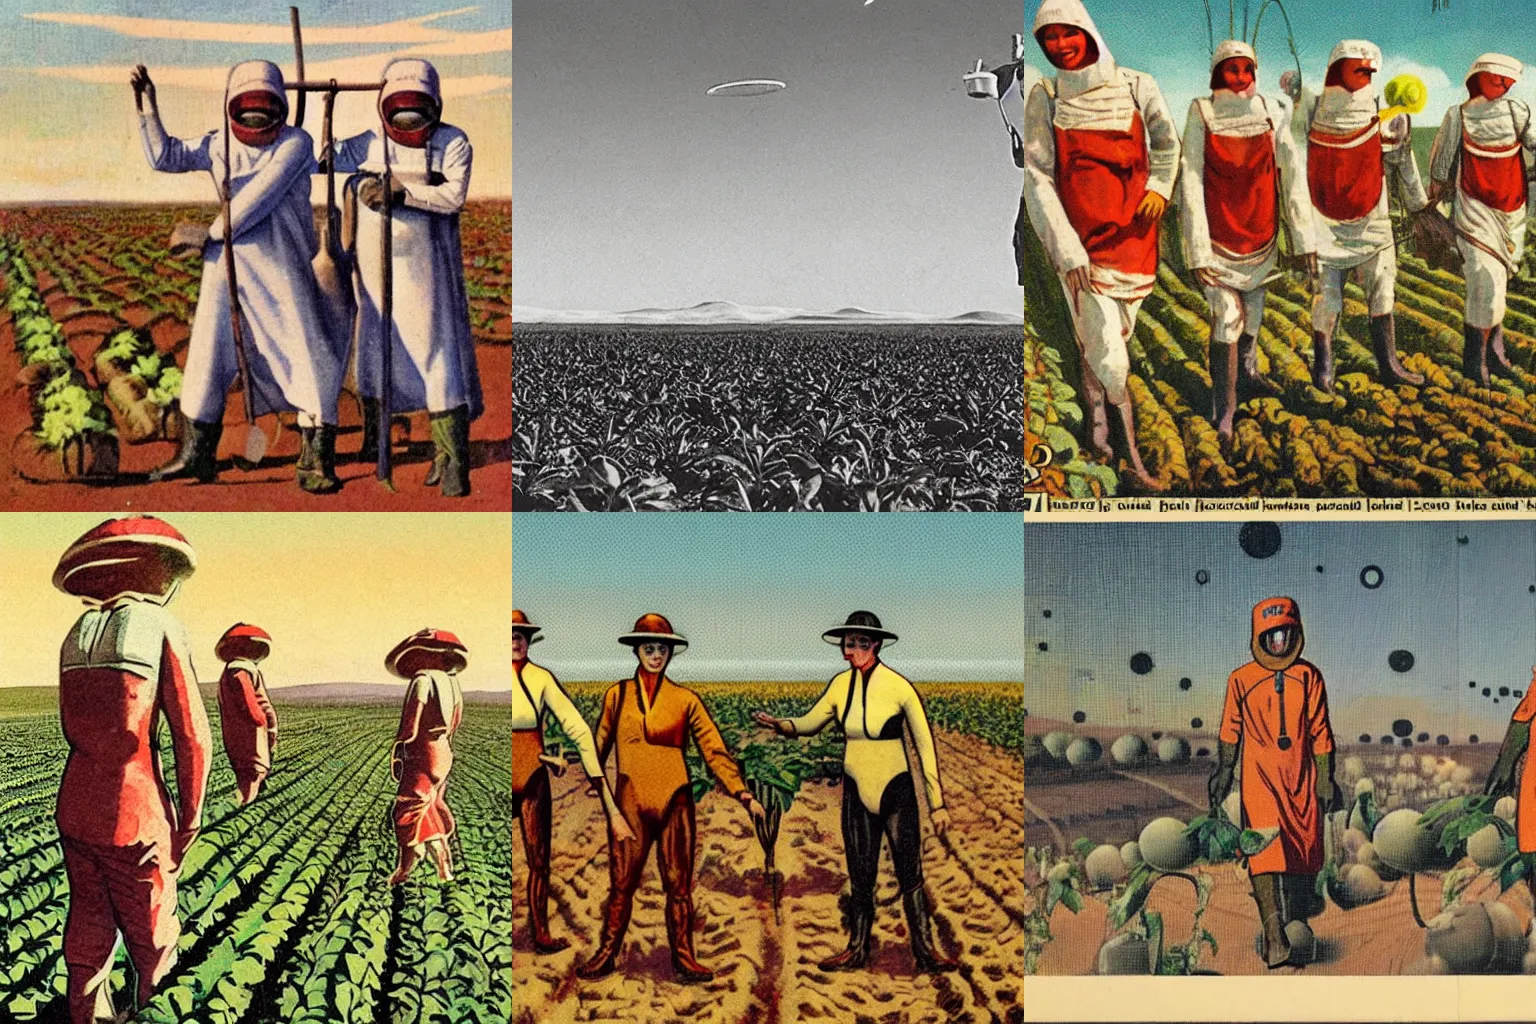 Prompt: An image in a magazine depicting farmers growing crops on mars in traditional farmers outfits, 1920s speculative futurism, distant shot